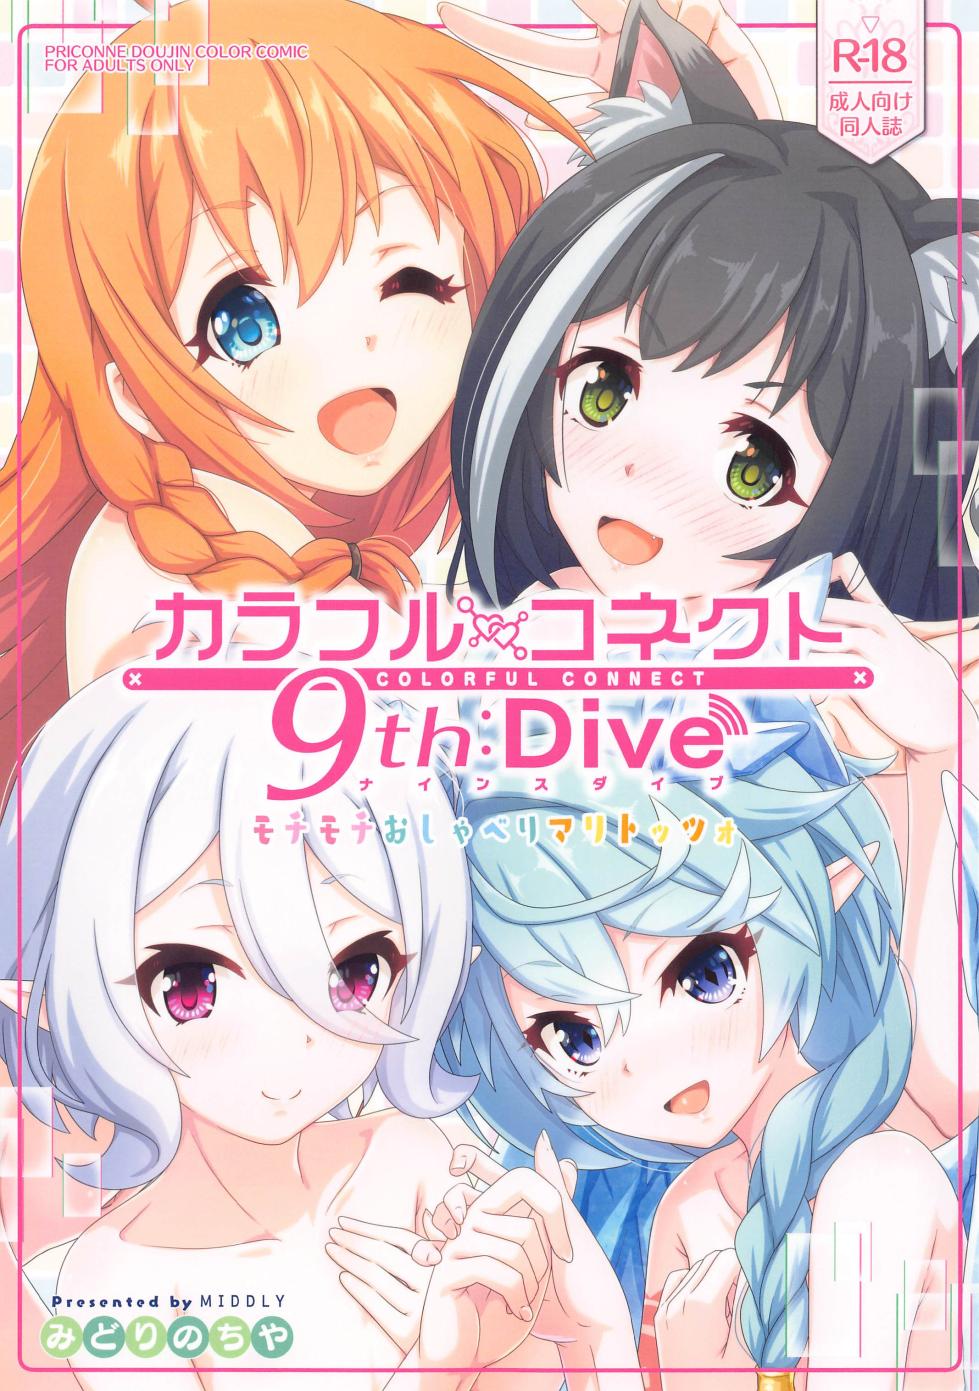 (C103) [MIDDLY (Midorinocha)] Colorful Connect 9th:Dive (Princess Connect! Re:Dive) - Page 1